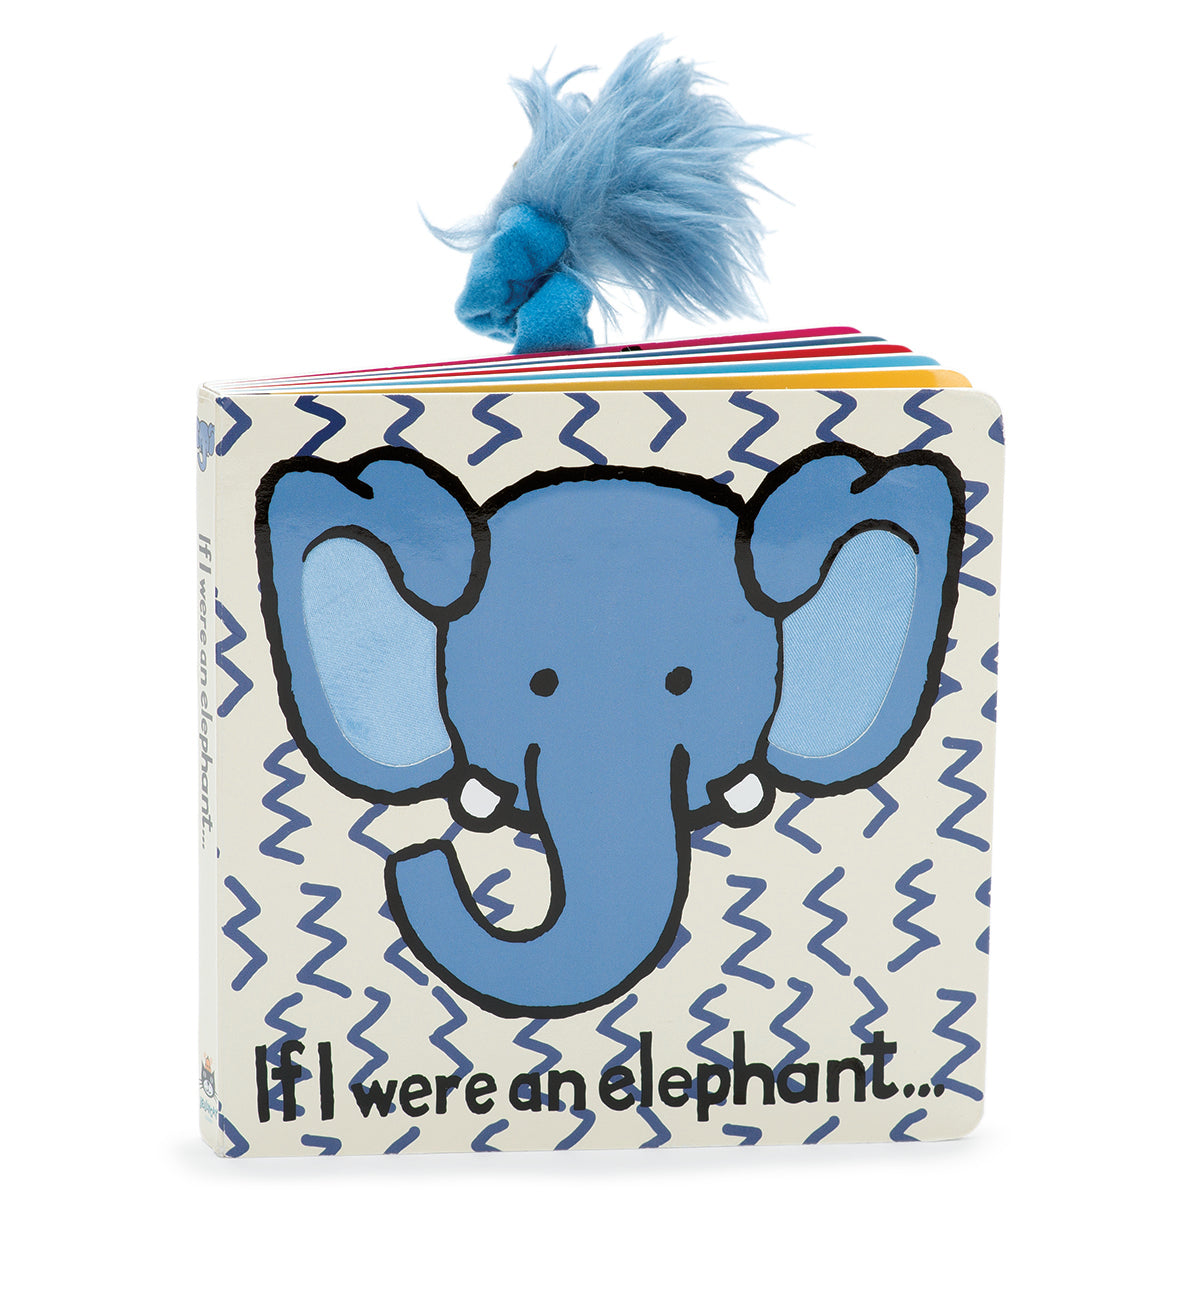 IF I WERE AN ELEPHANT BOOK by JELLYCAT